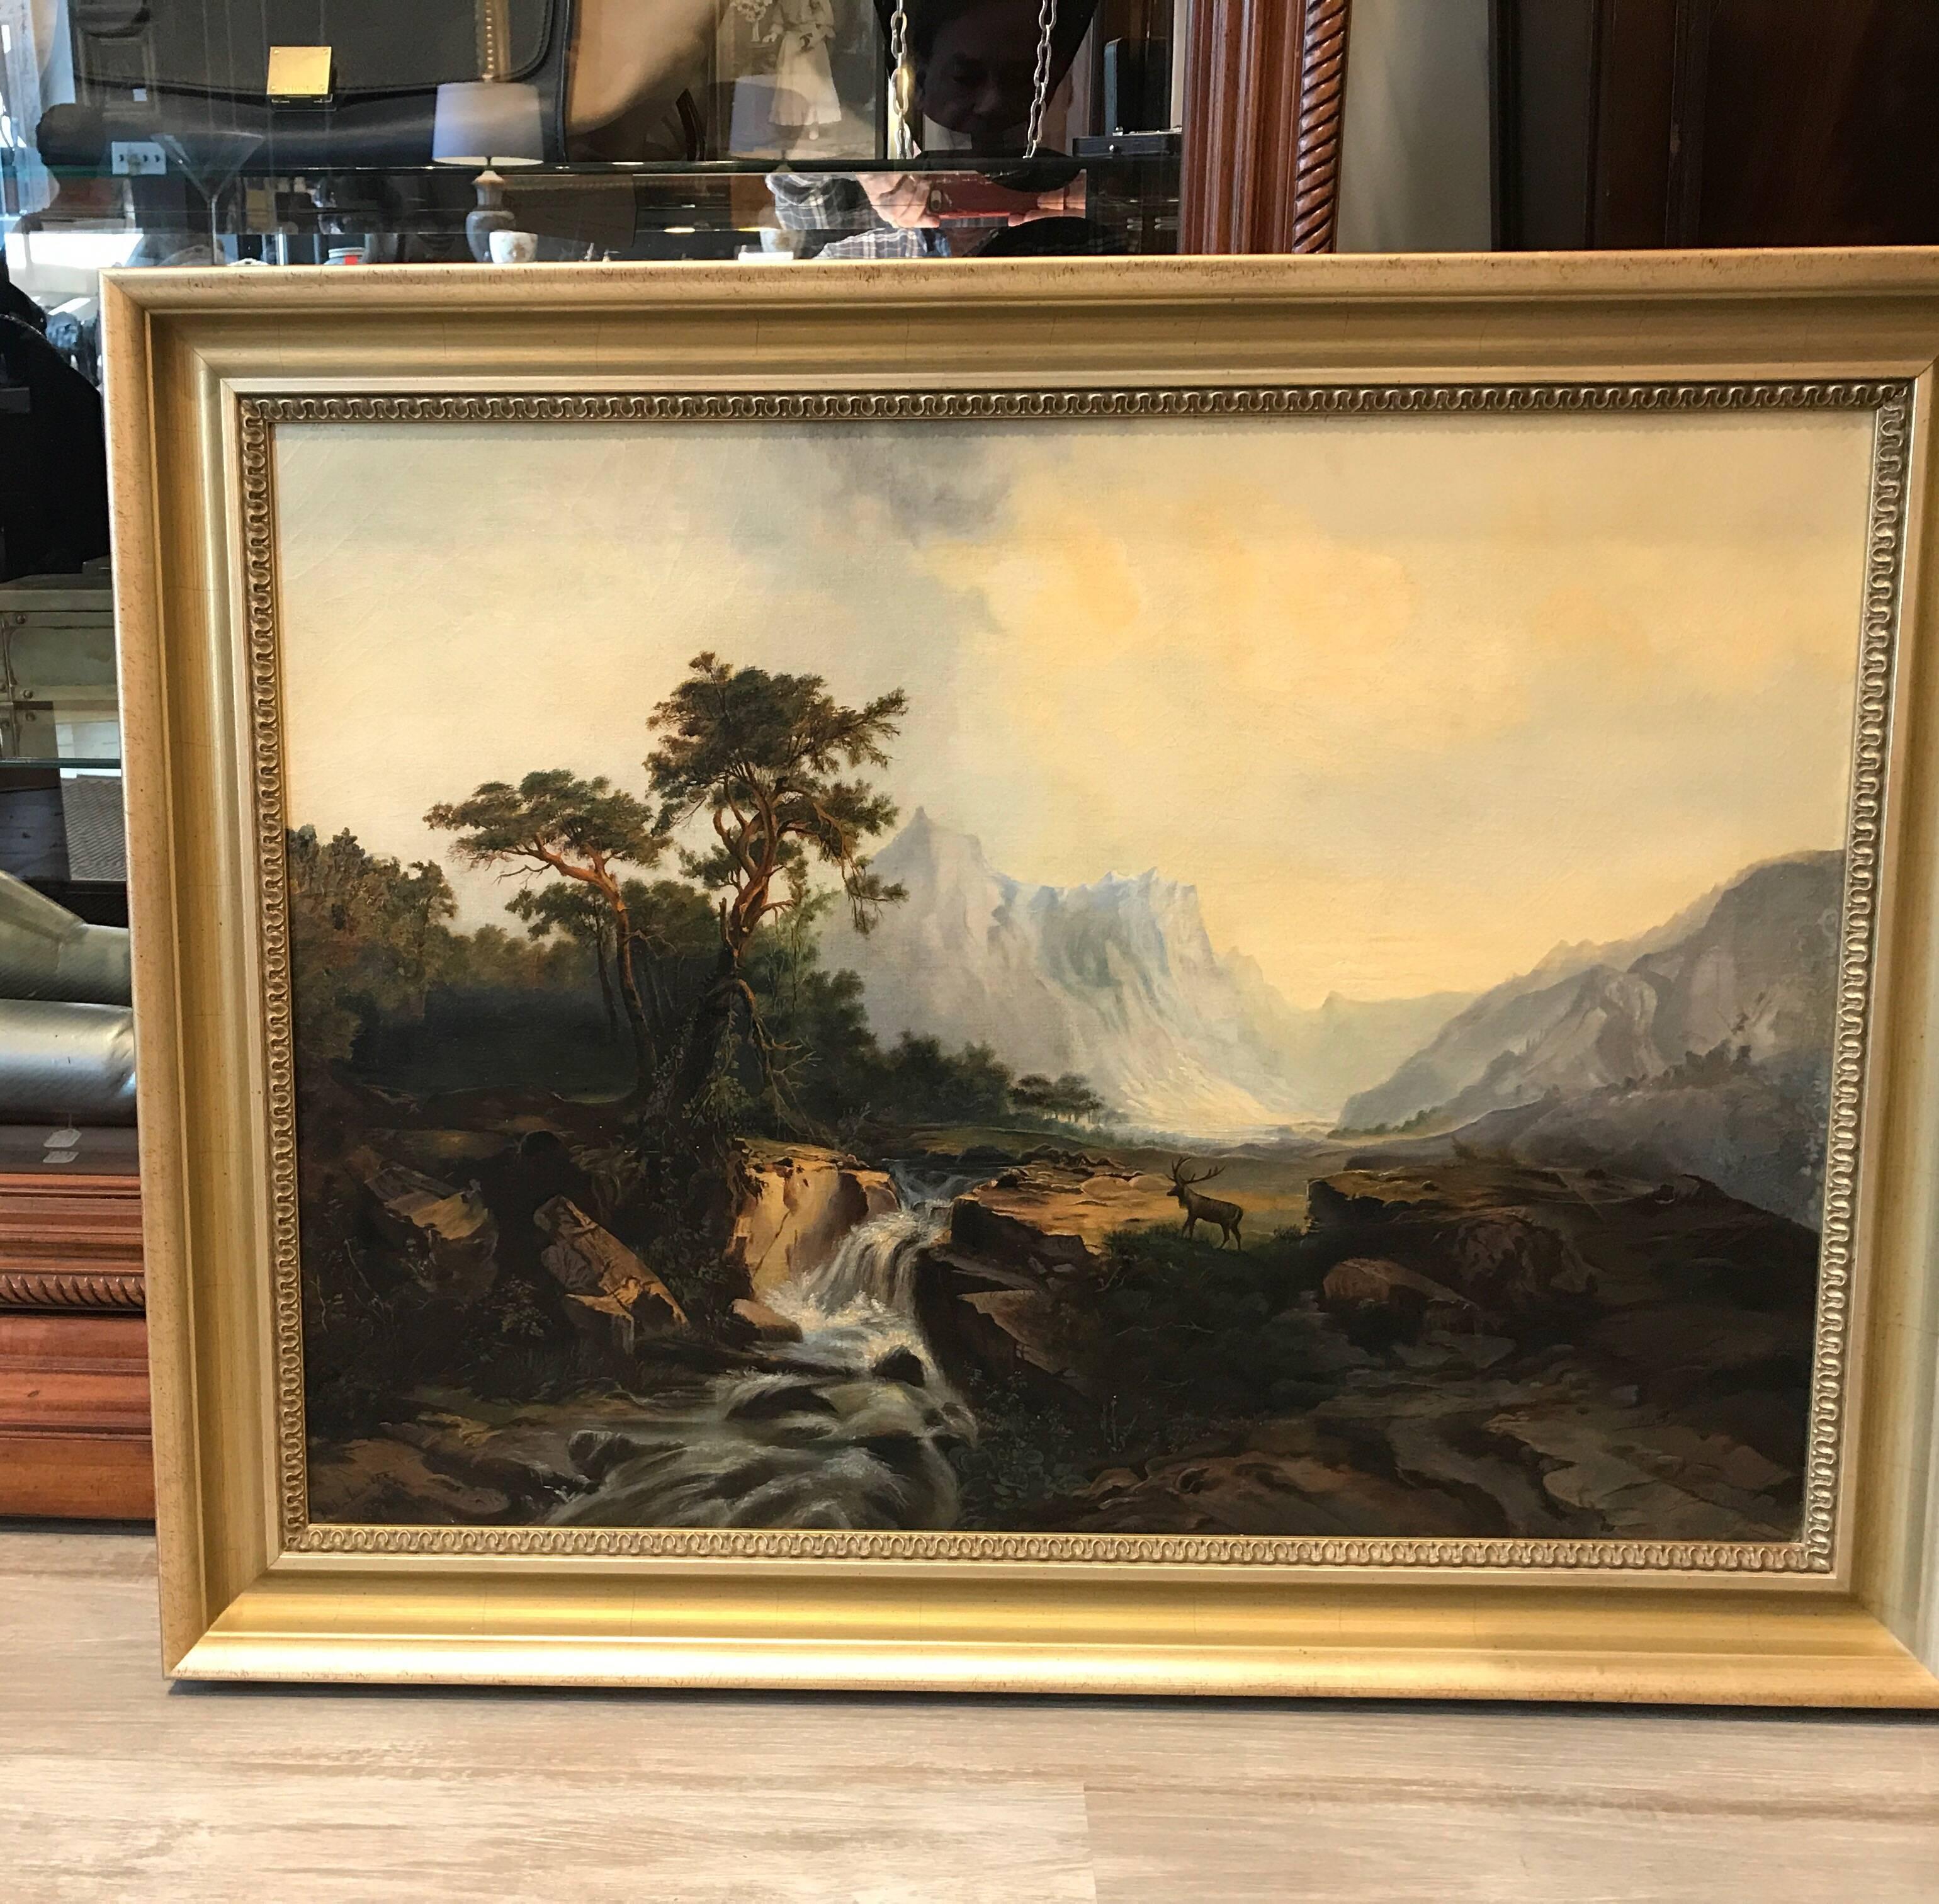 Oil on canvas bucolic scene with elk. Artist singed and dated. The canvas had been re-stretched and relined and is in excellent condition in a silver gold gilt more recent wood frame. The painting is European and probably Austrian.